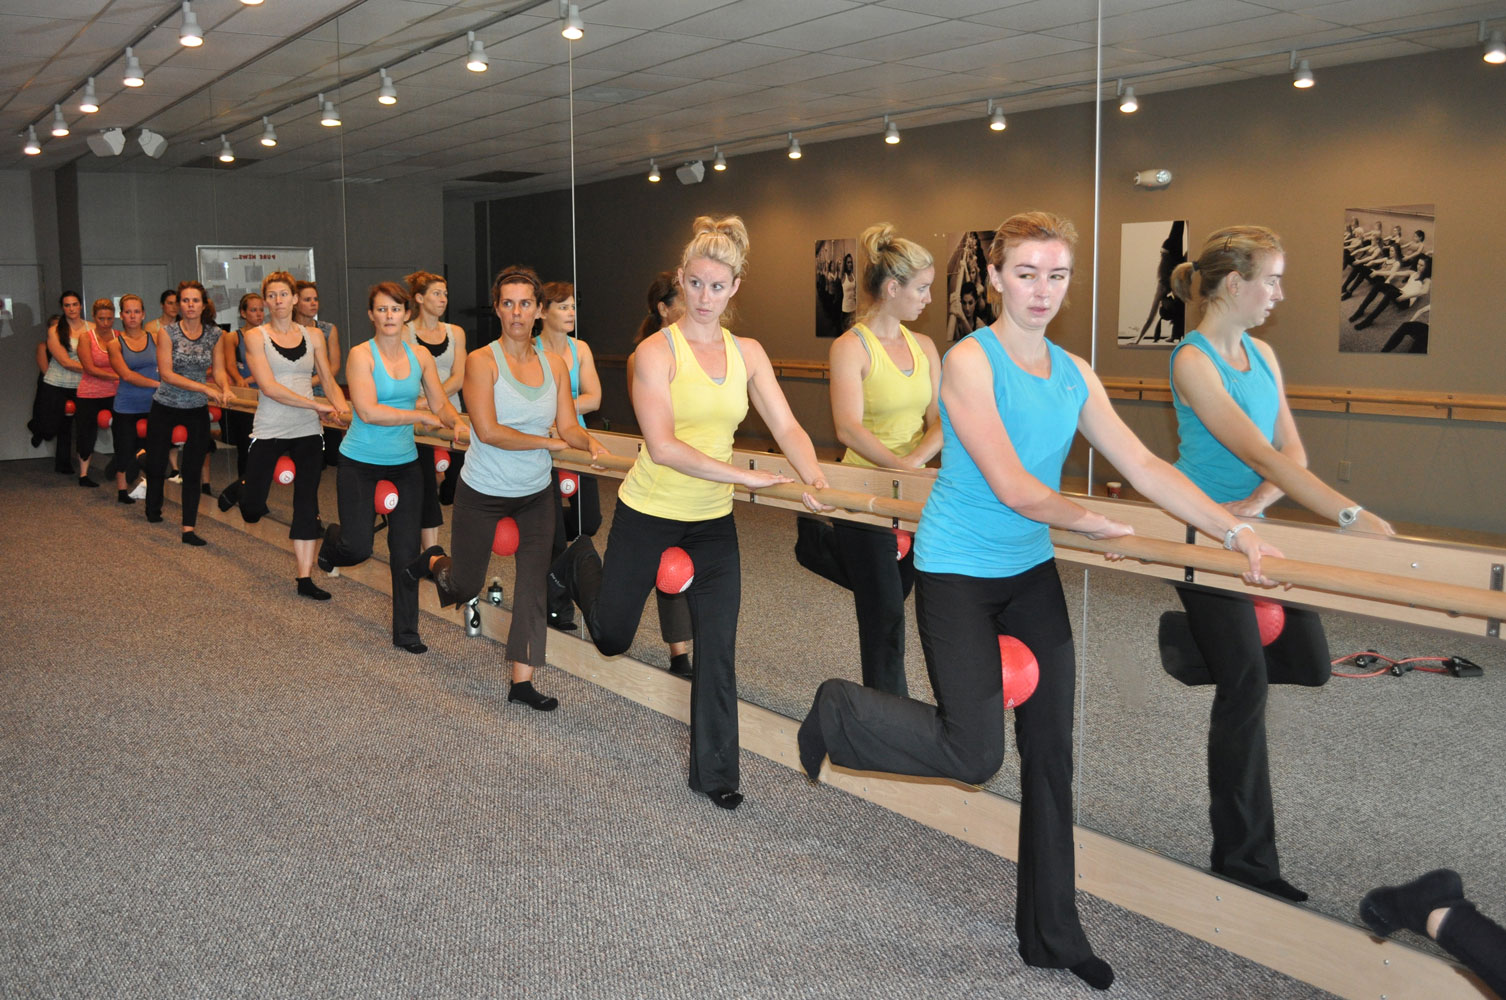 Try-Athlete: Pure Barre Workout